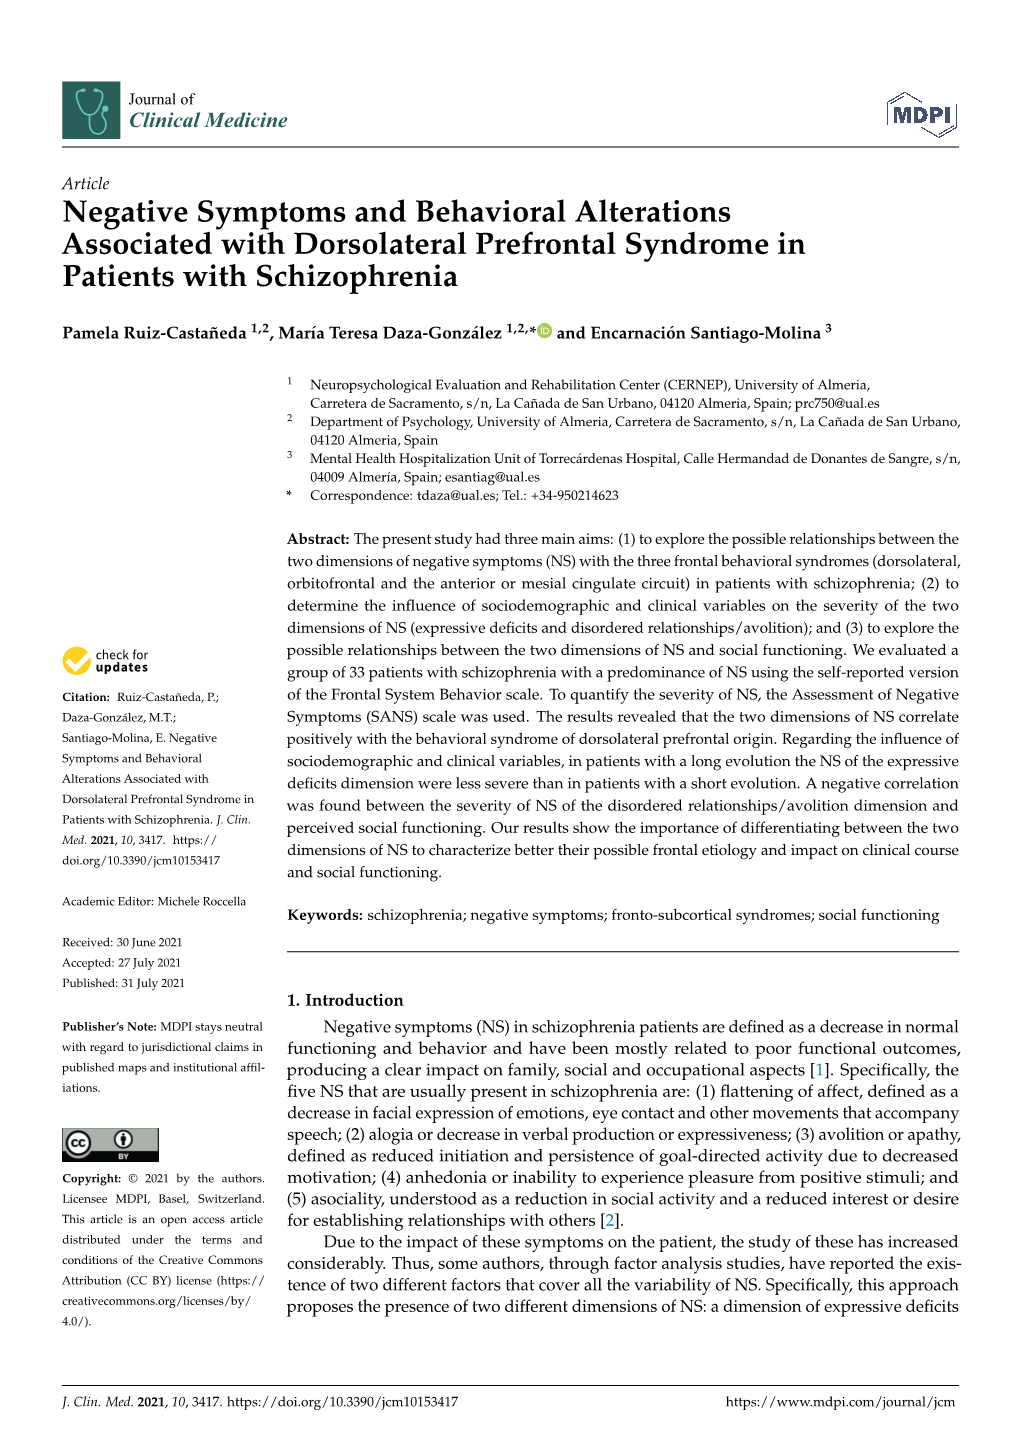 Negative Symptoms and Behavioral Alterations Associated with Dorsolateral Prefrontal Syndrome in Patients with Schizophrenia